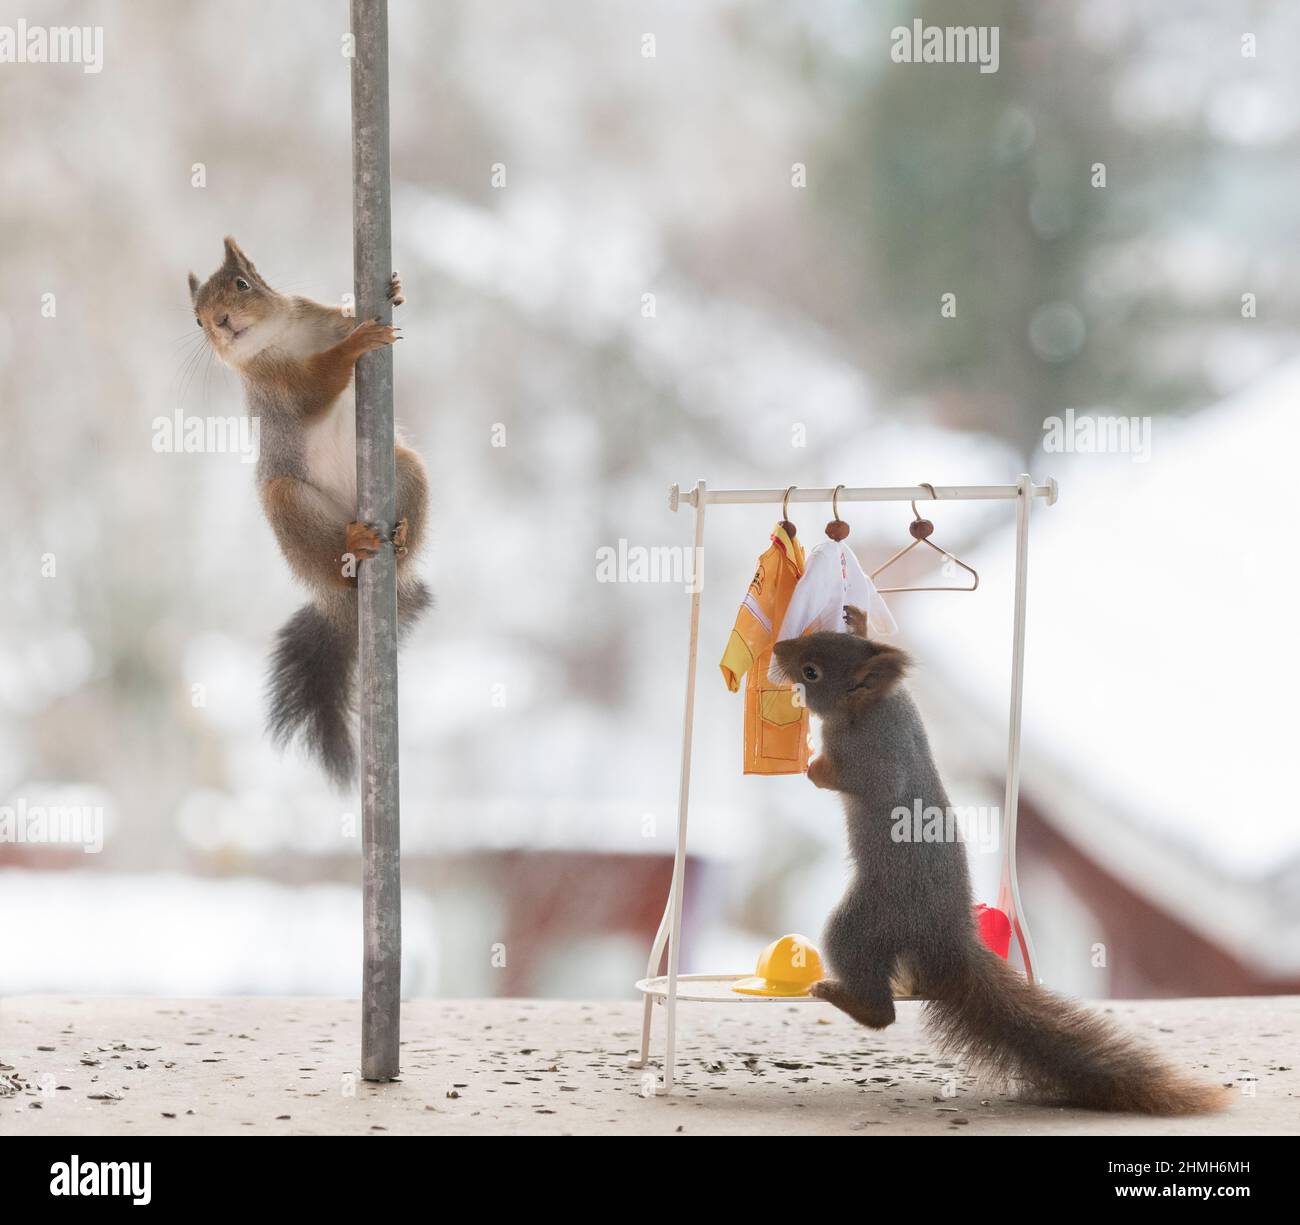 red squirrel on pole and fire brigade clothes Stock Photo